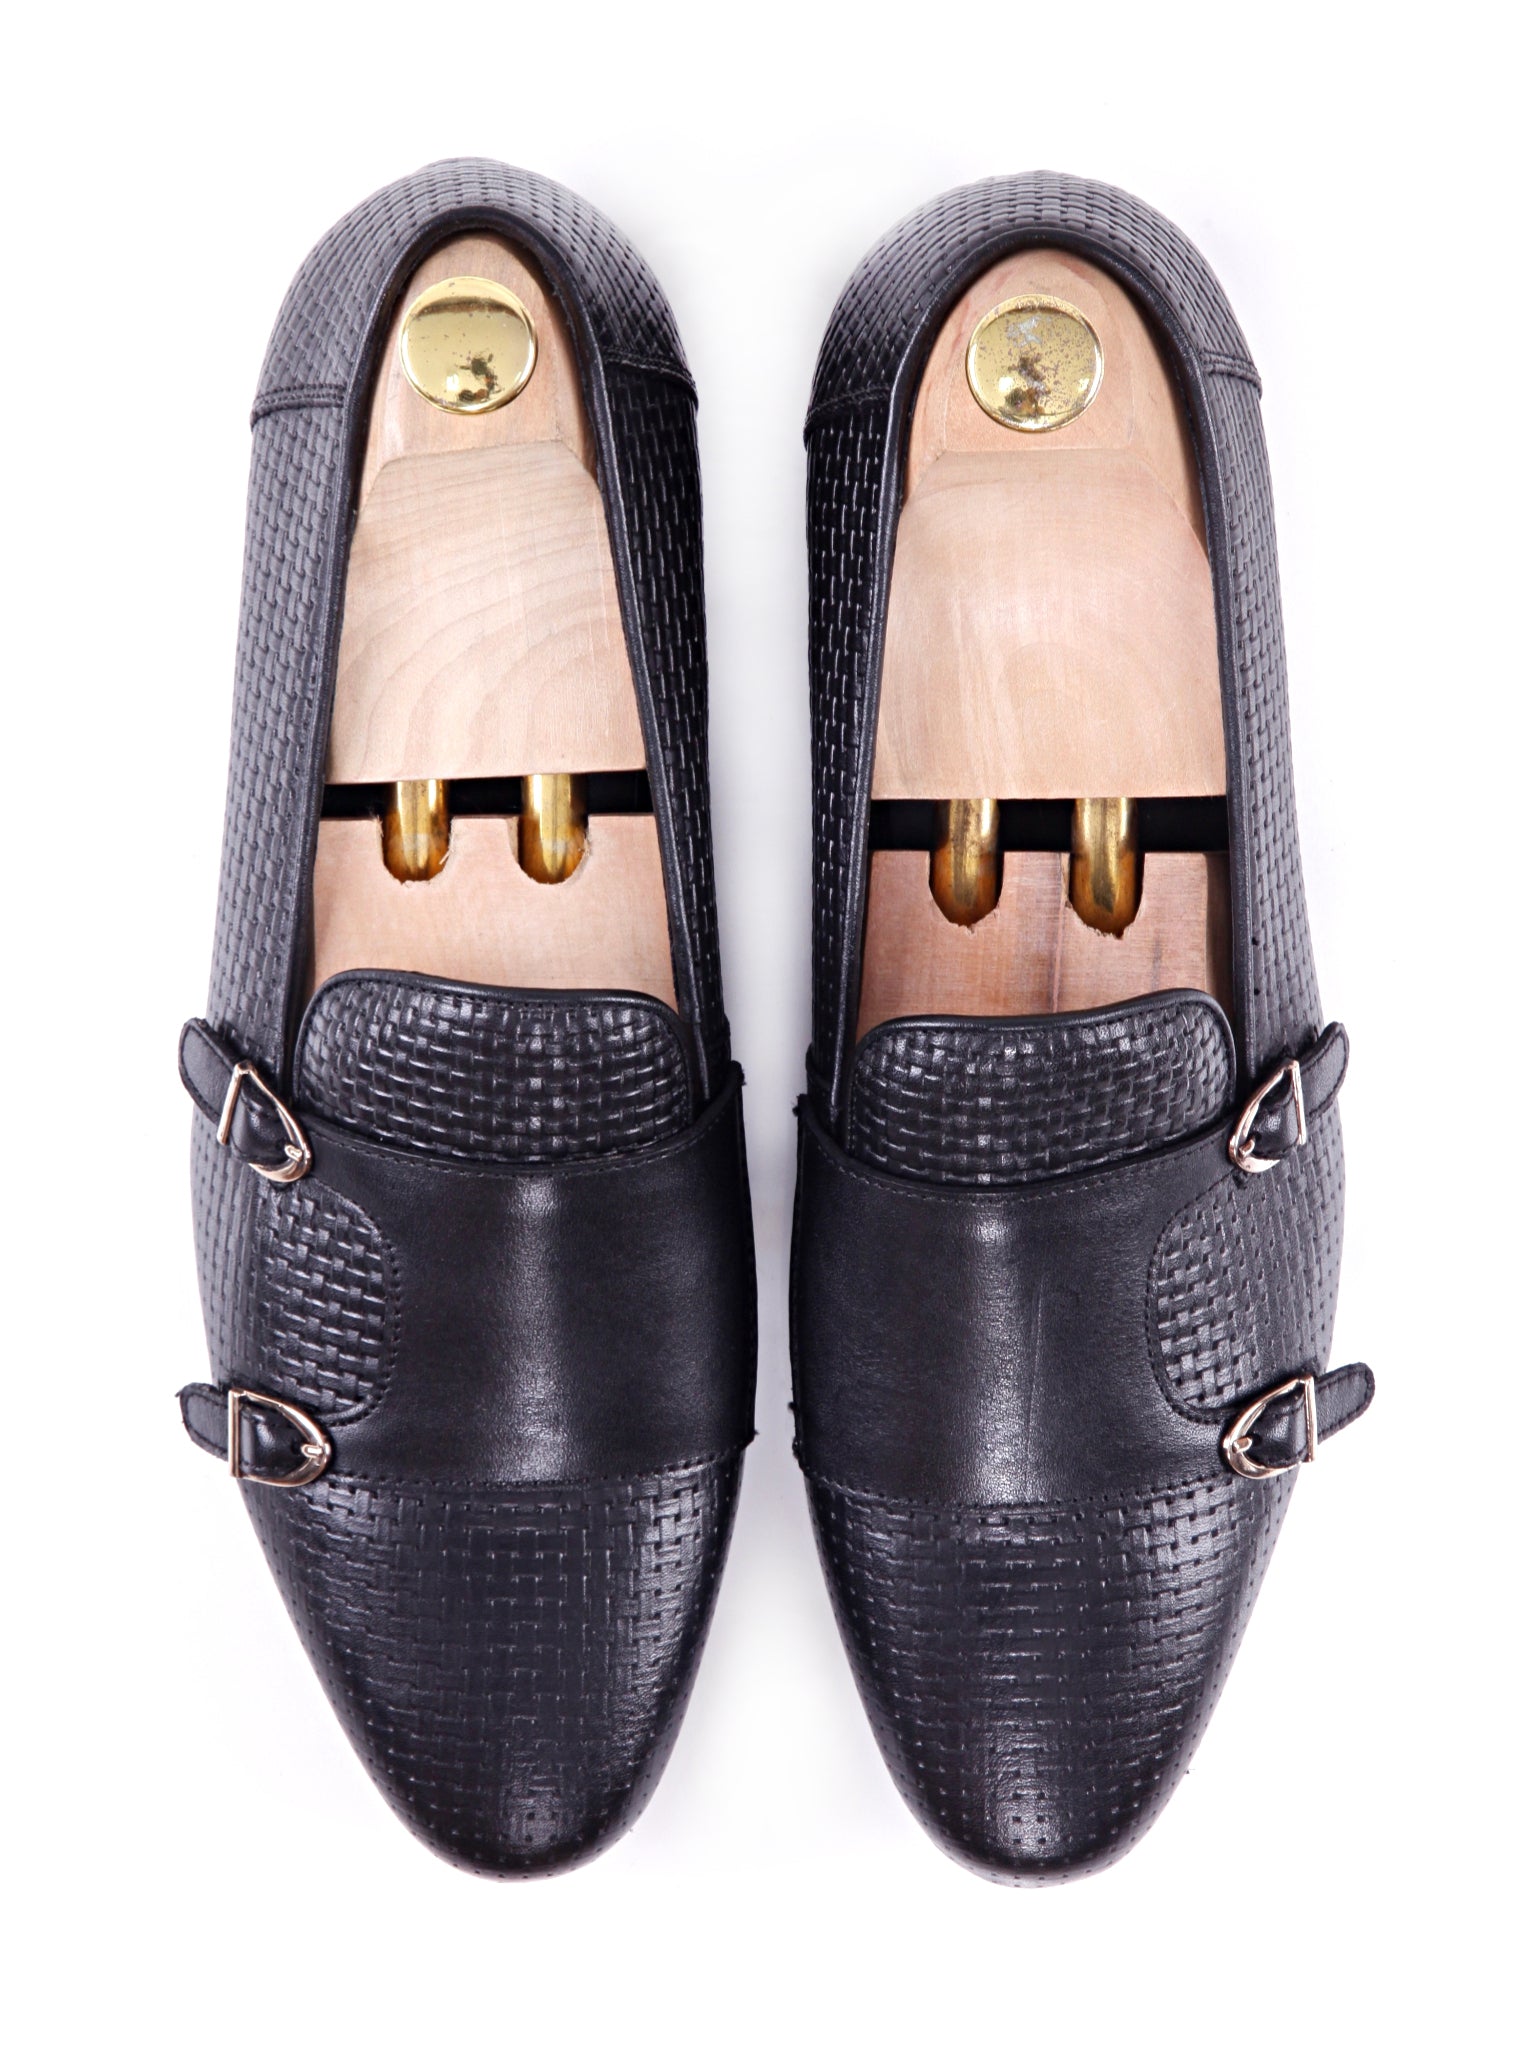 Loafer Slipper - Black Double Monk Strap with Woven Leather - Zeve Shoes